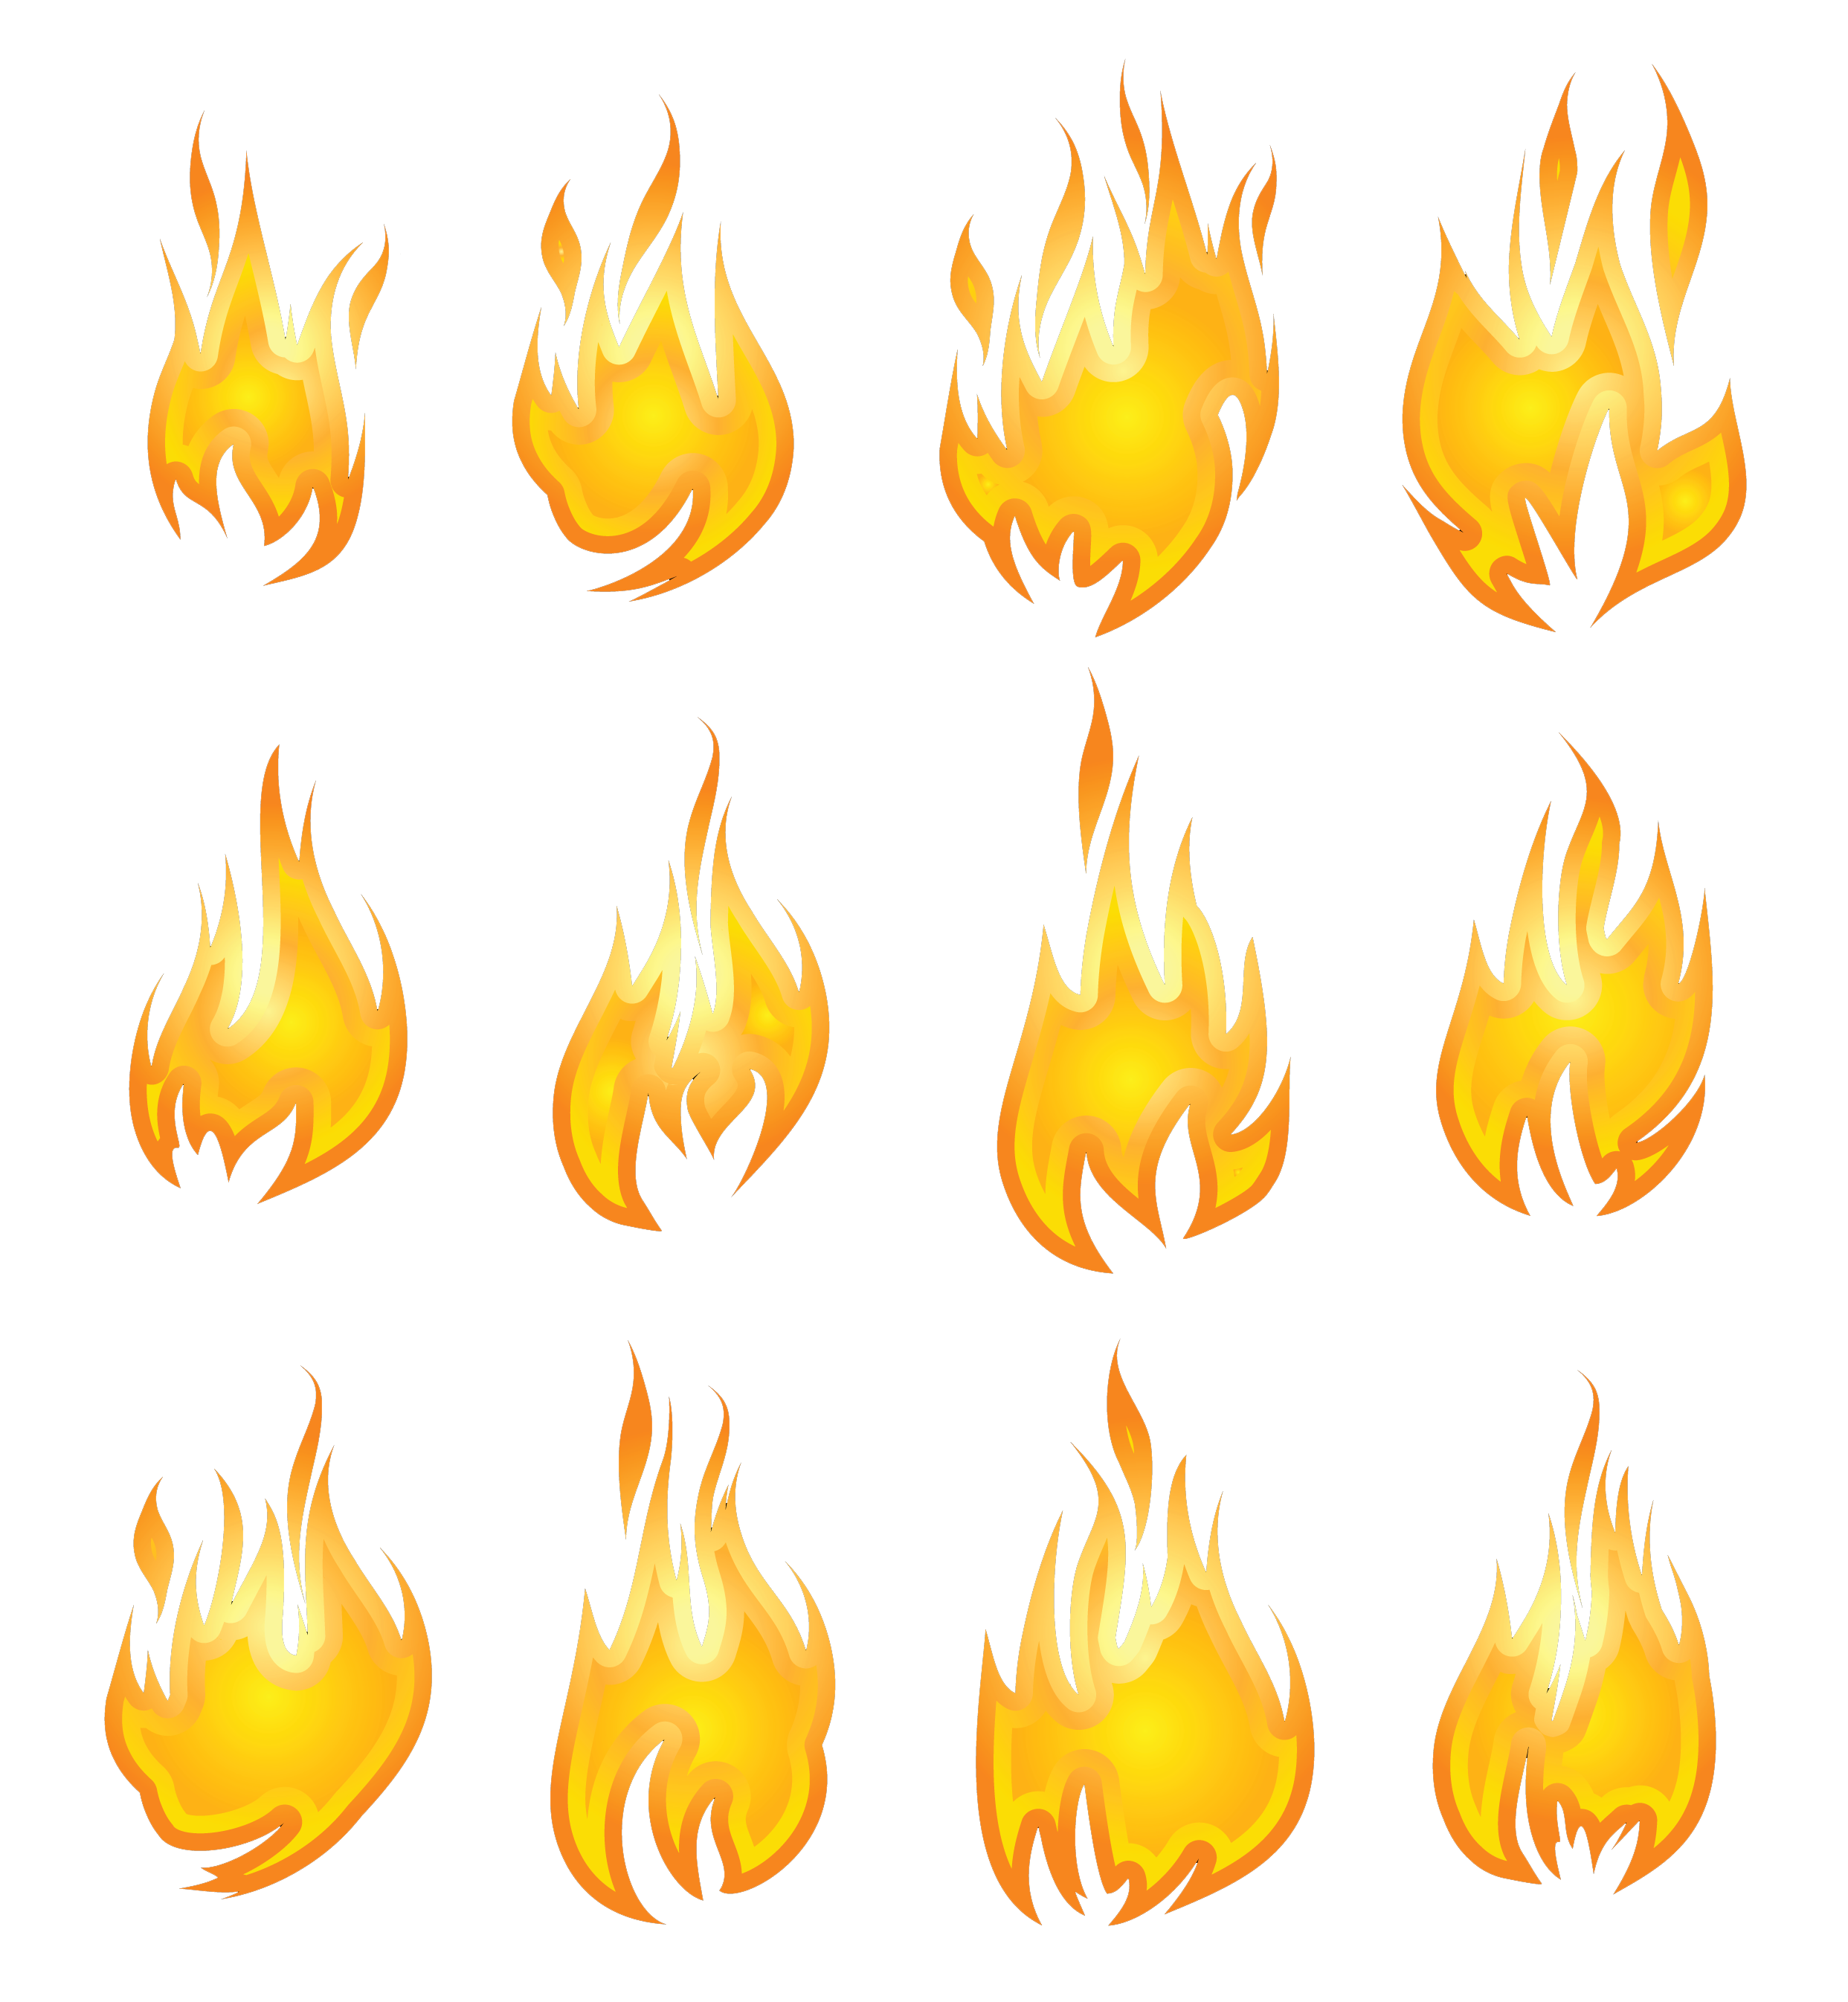 Fire flame PNG image free download 